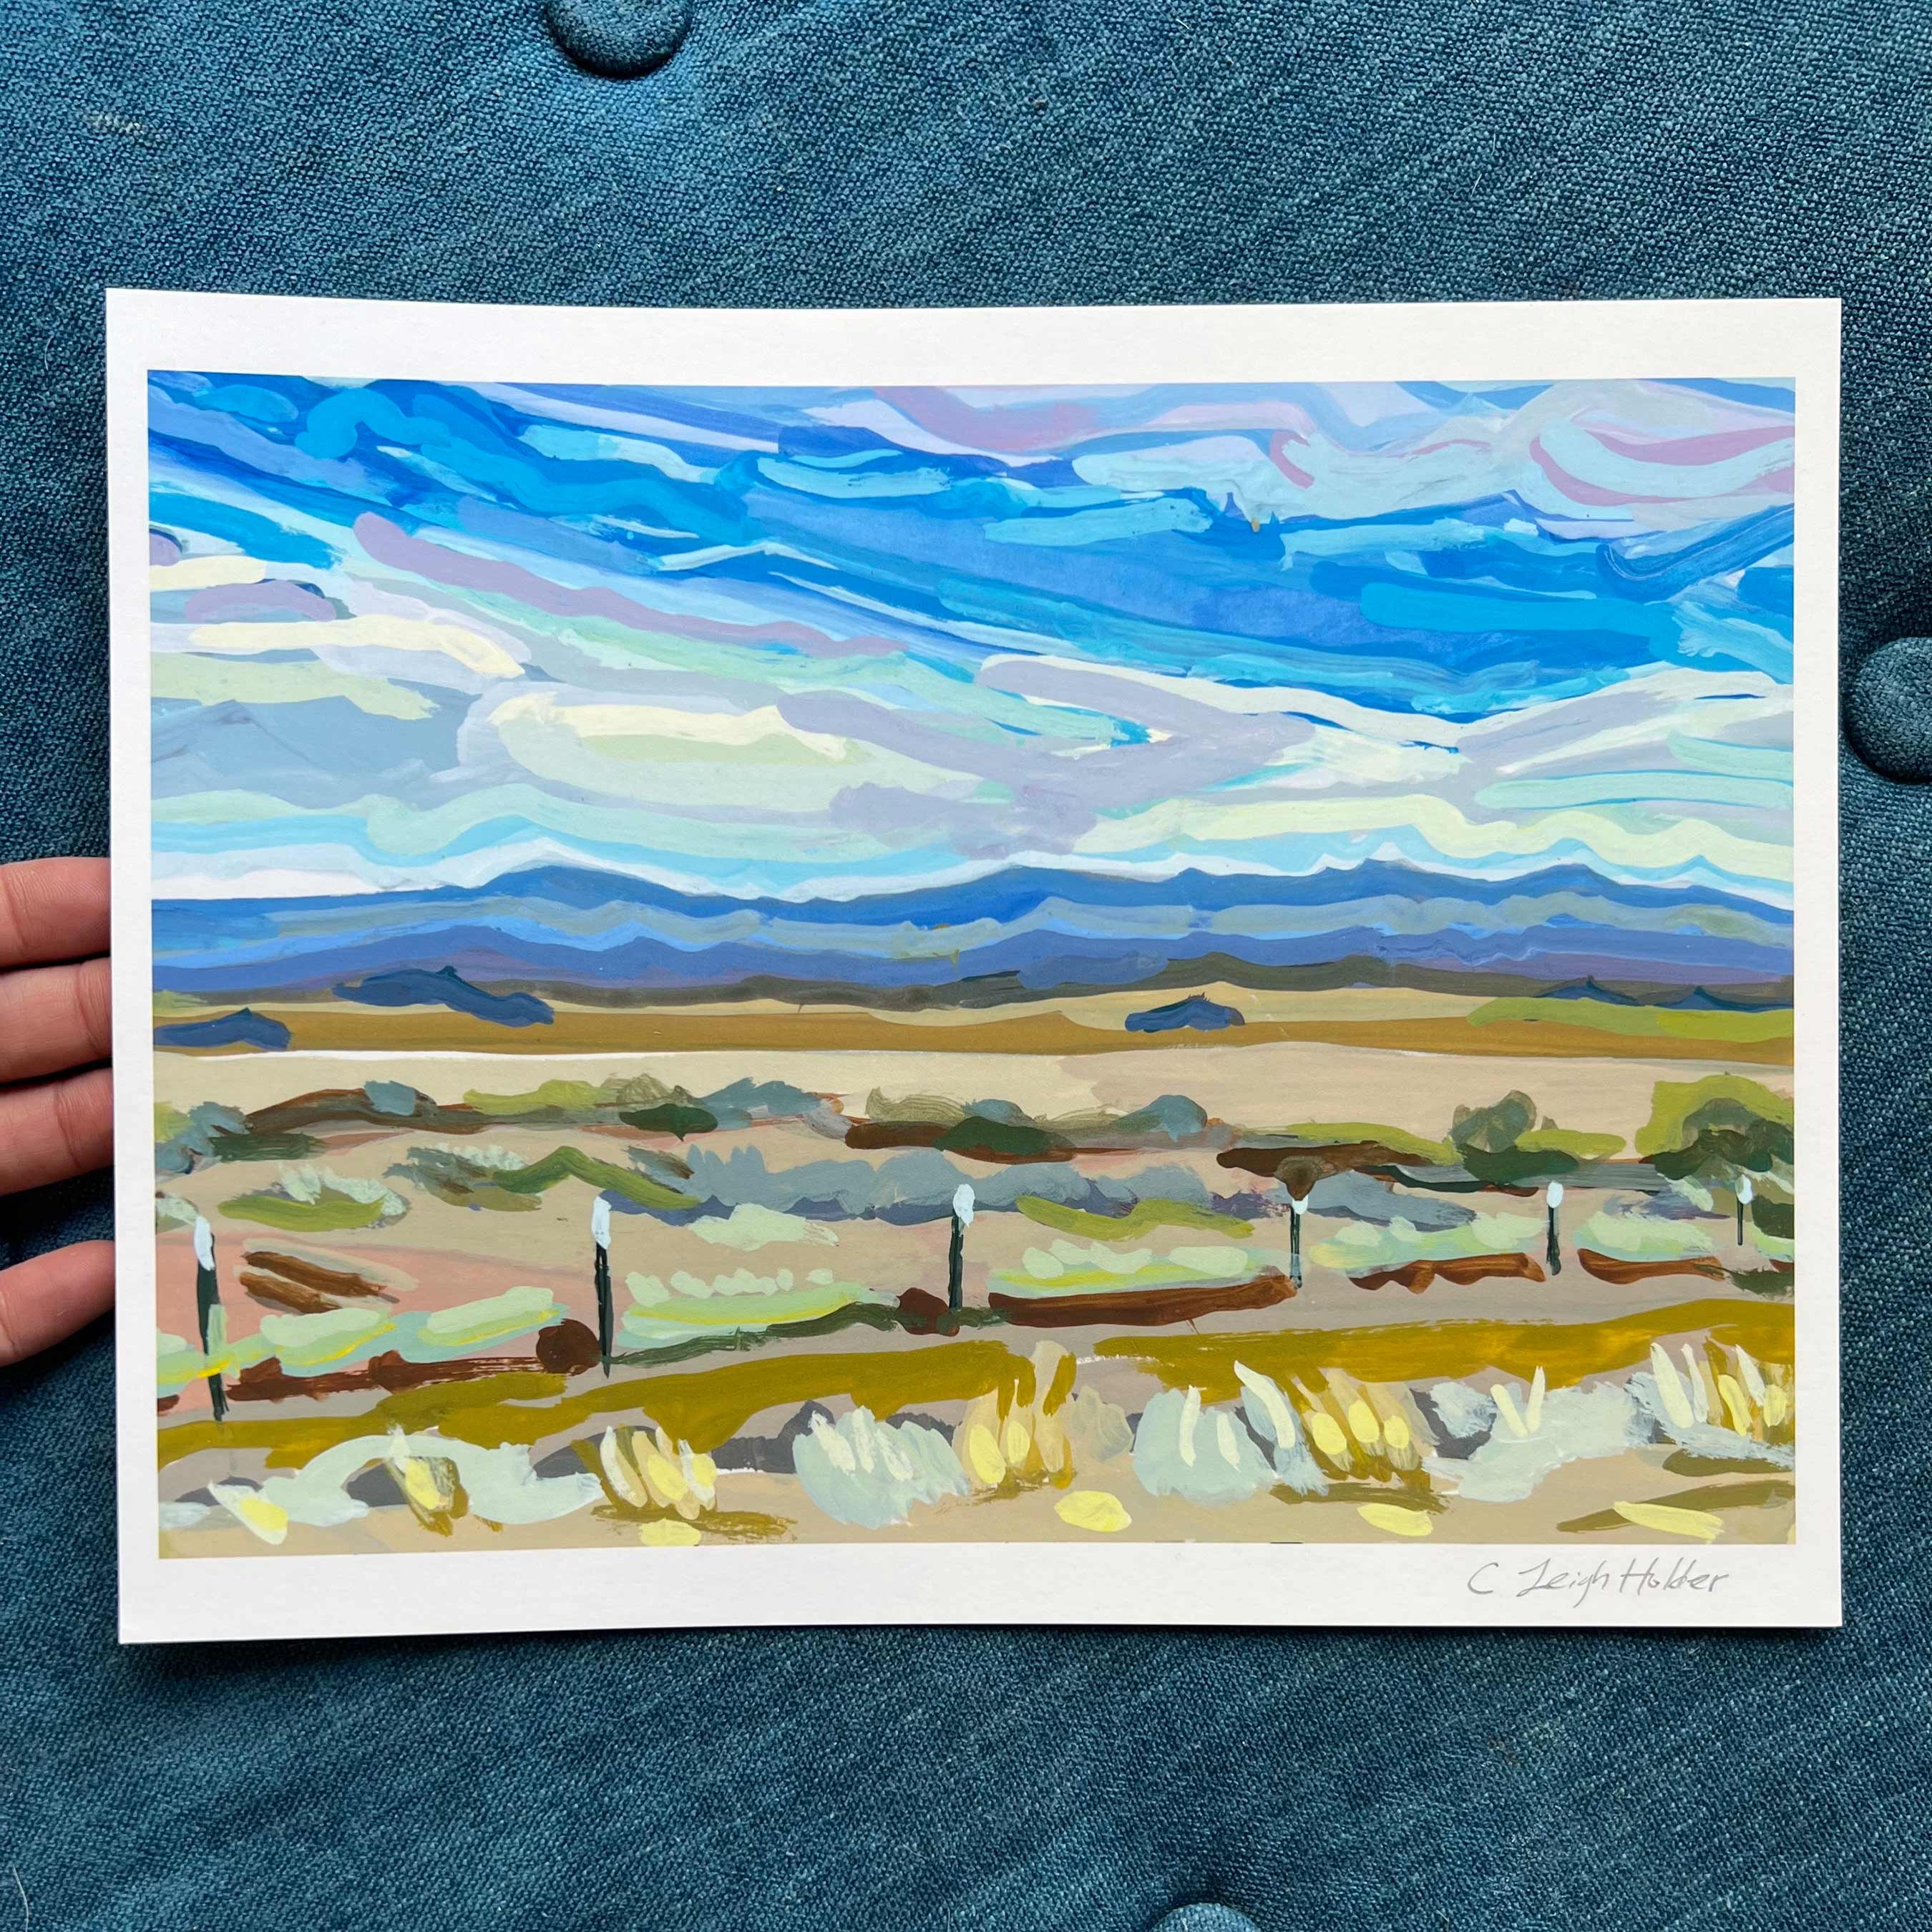 Far West Texas Landscape Art Print, Archival Print of Original Gouache Painting of Wide Open Spaces in Marfa, Texas, 11 x 8.5